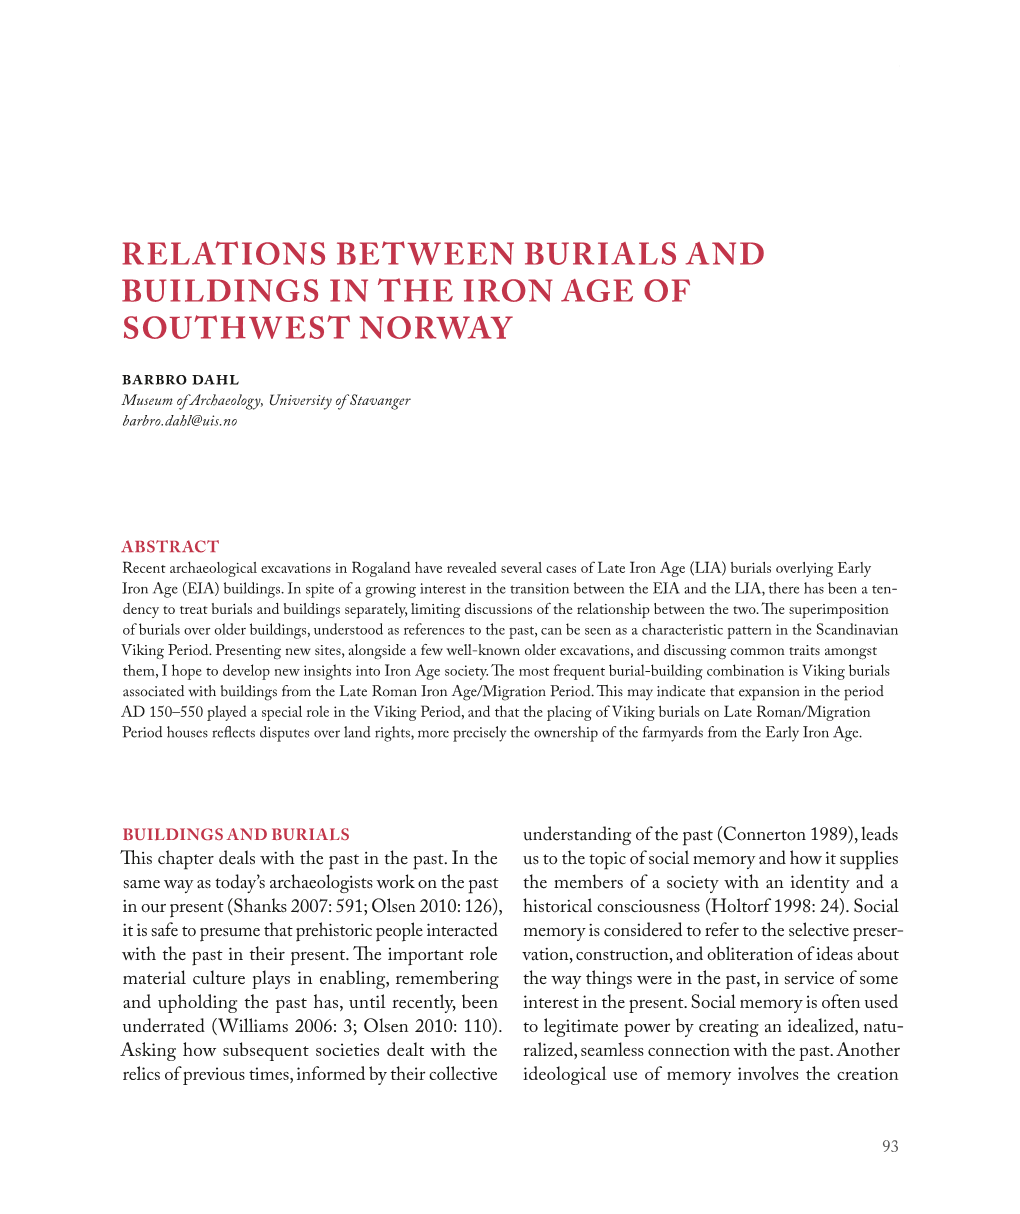 Relations Between Burials and Buildings in the Iron Age of Southwest Norway